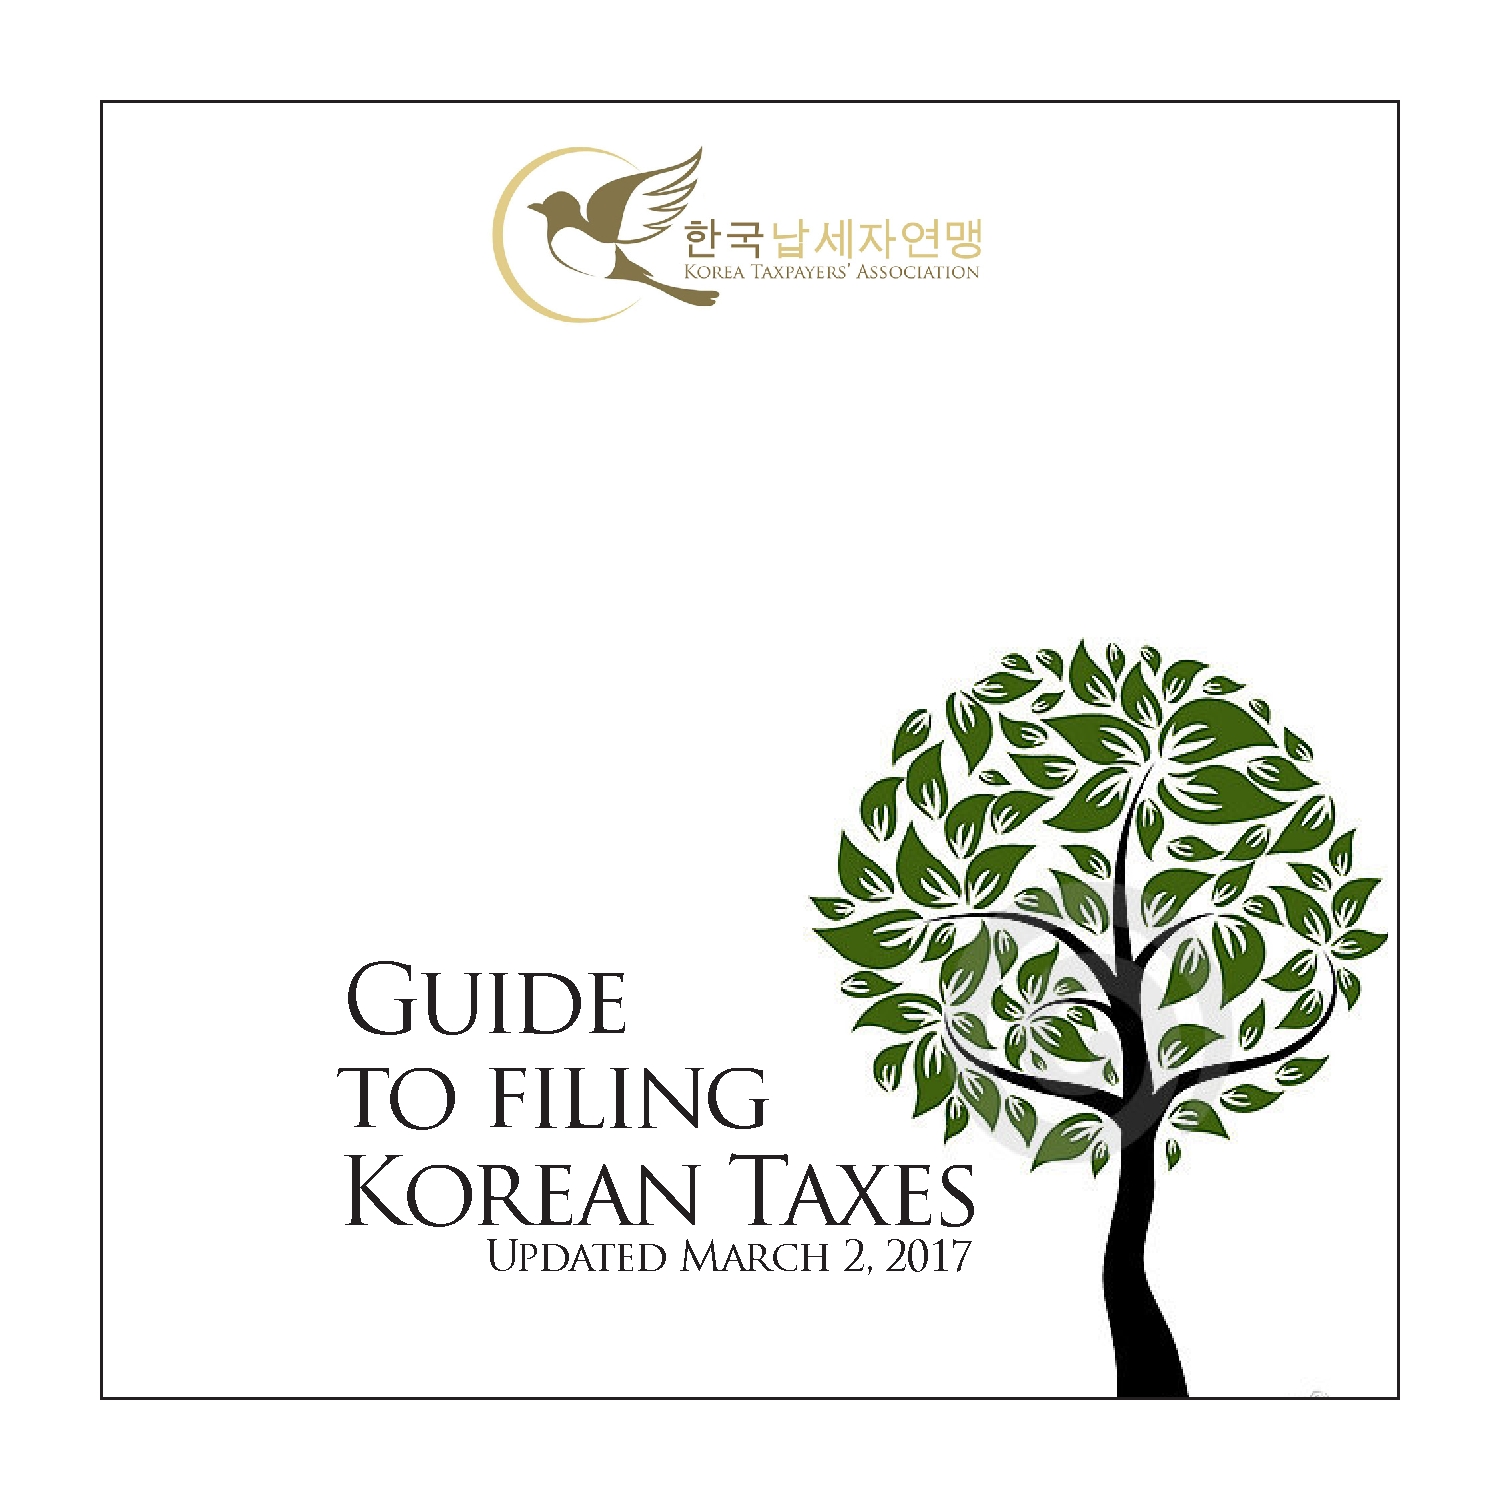 subGuide to filing Taxes in Korea_1.jpg